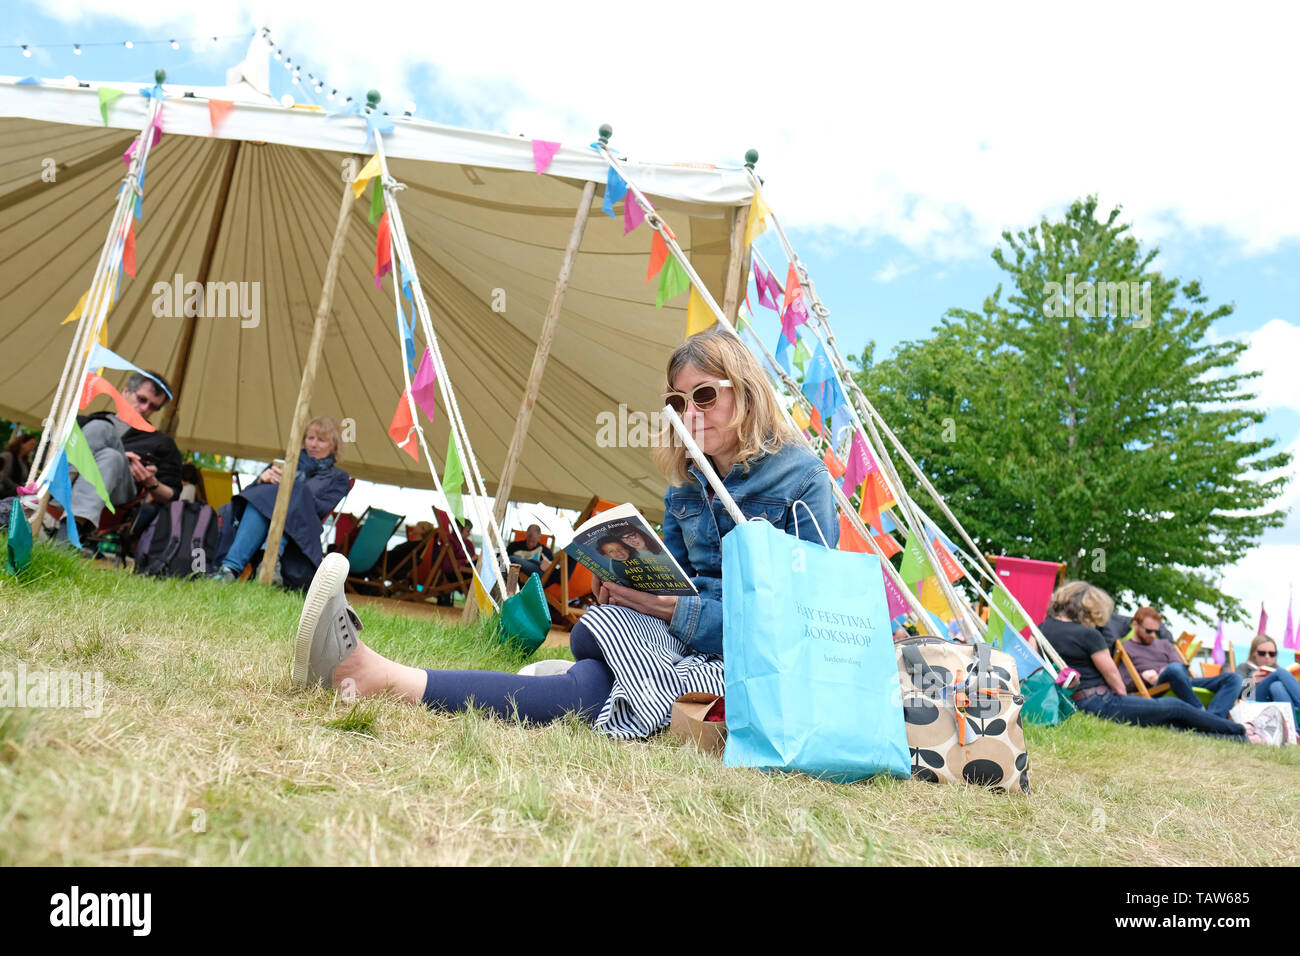 Hay Festival, Hay on Wye, Powys, Wales, UK - Tuesday 28th May 2019 - A  visitor enjoys a break on the Festival lawns between events and speakers at  the Hay Festival. Photo